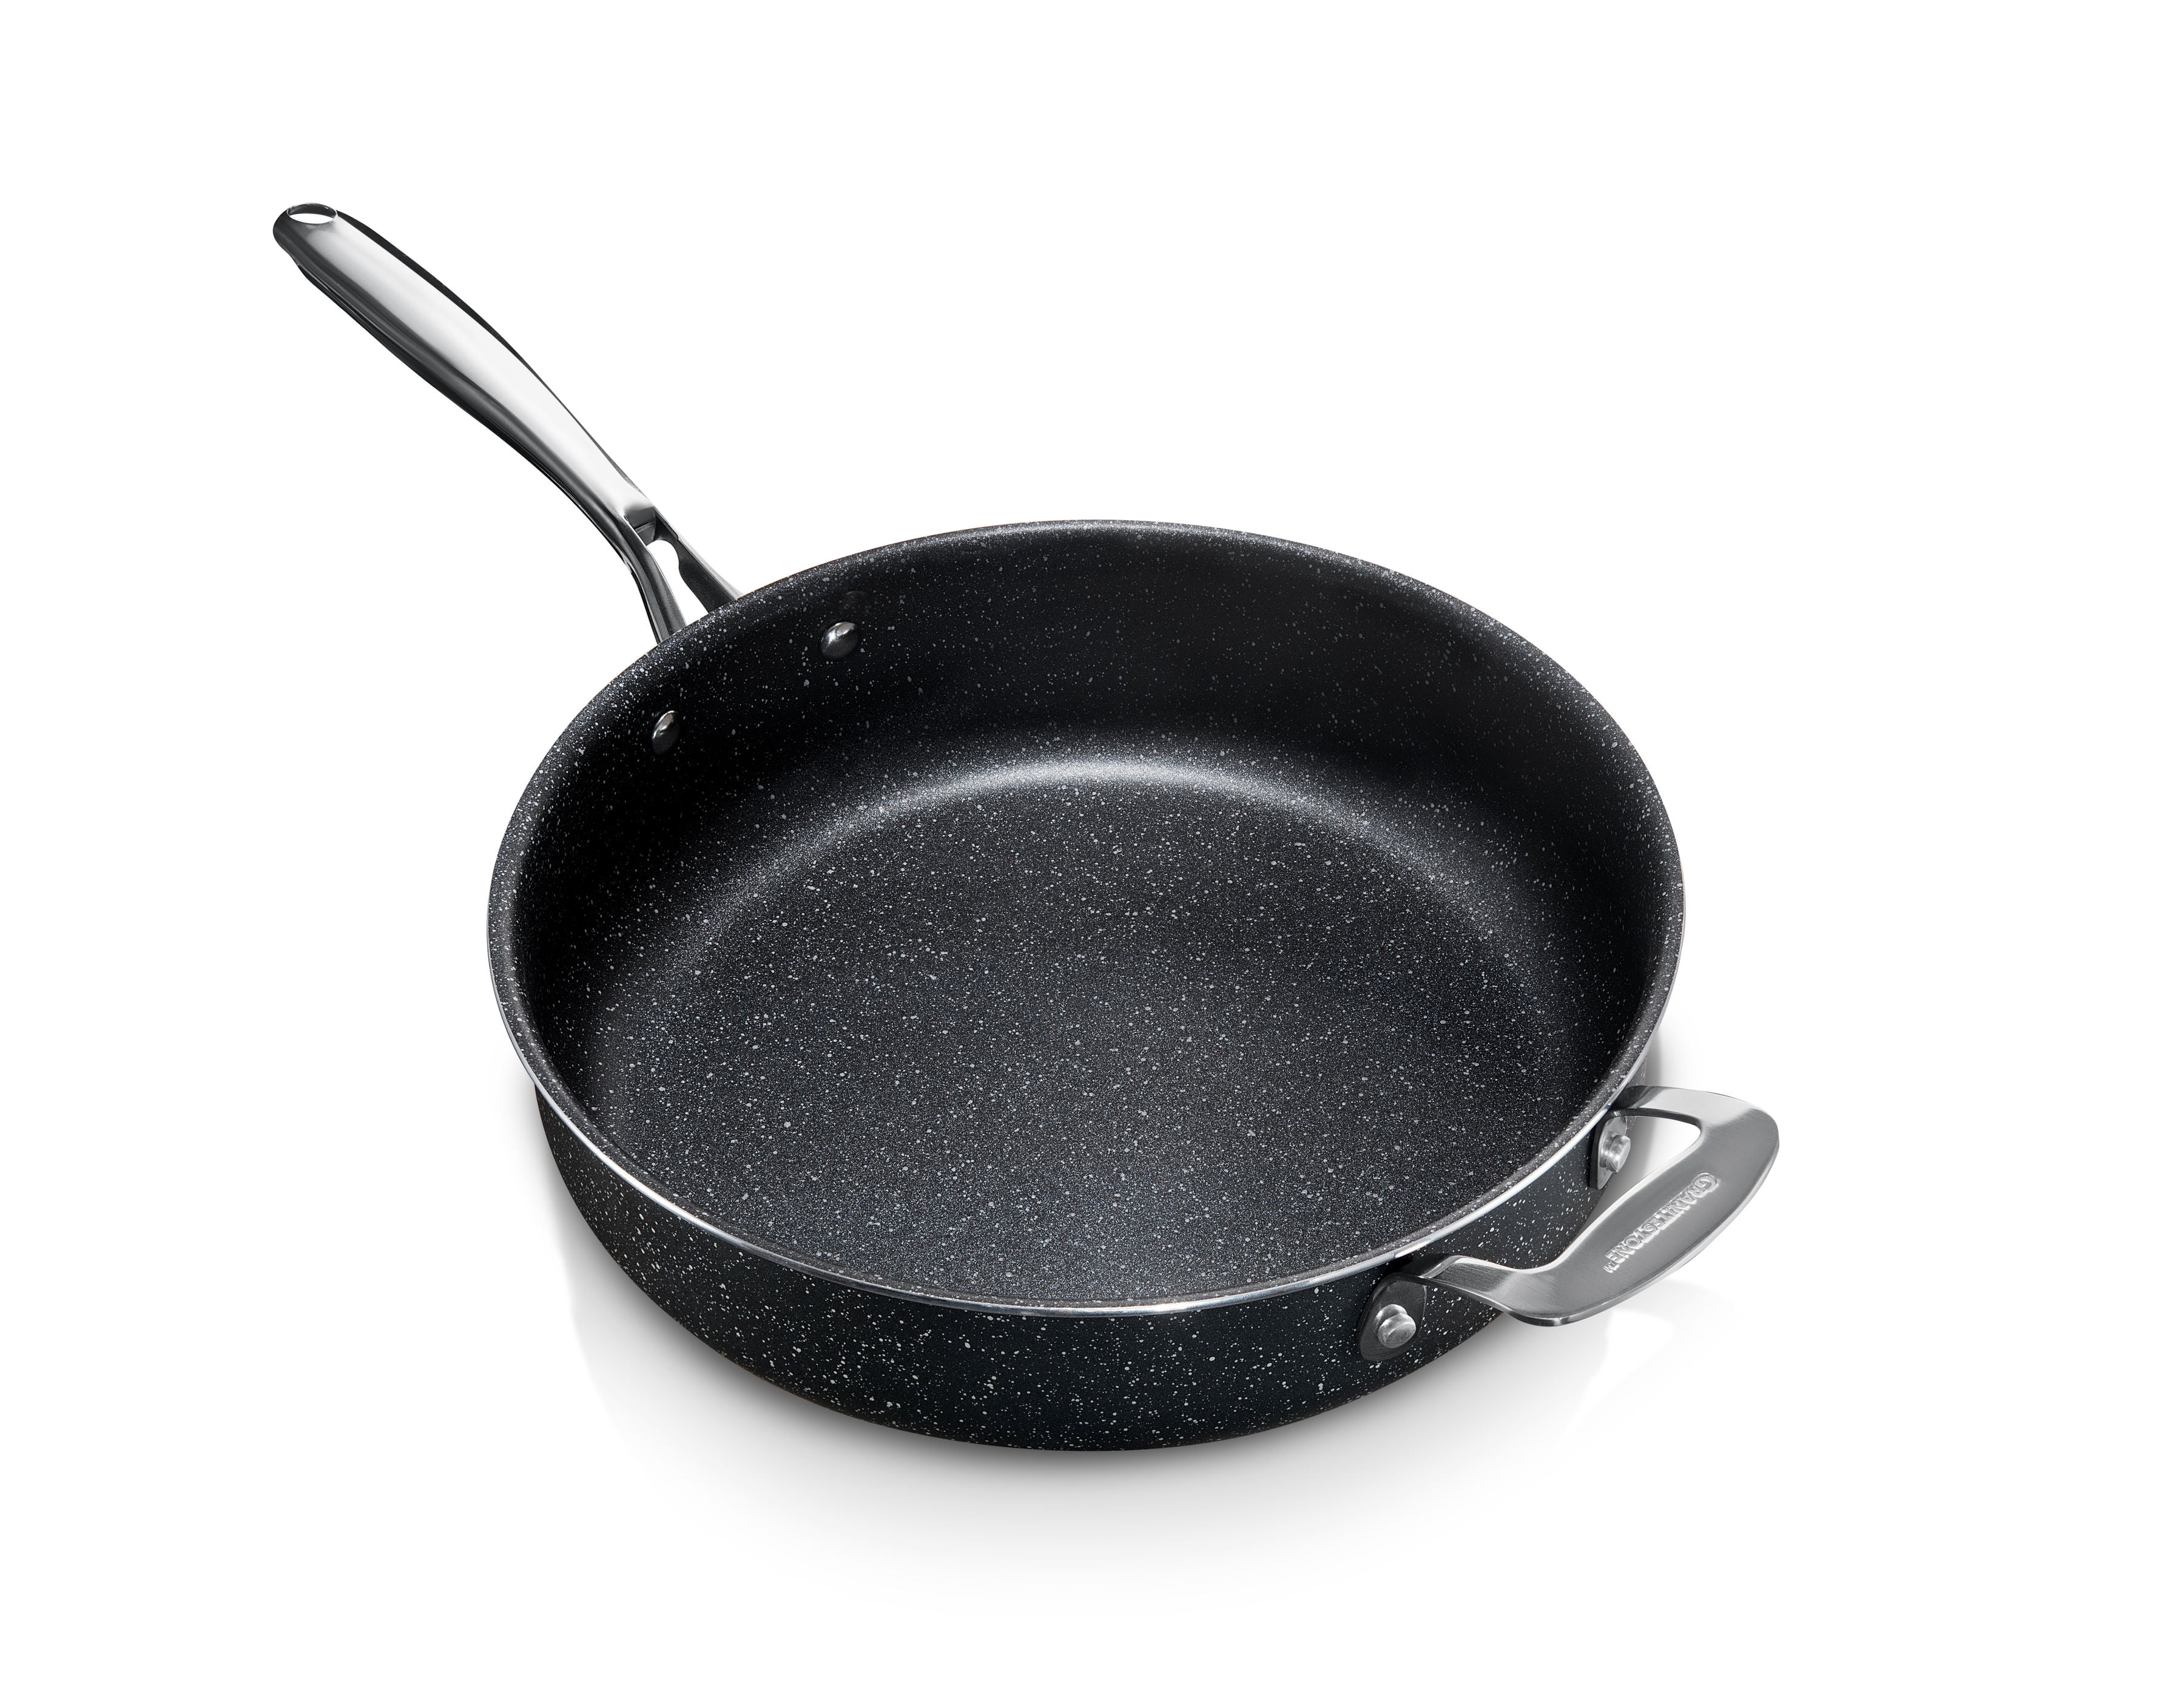 Granitestone Armor Max 5.5 Quart.Sauté Pan with Lid - 12 inch Non Stick Deep Frying Pan with Lid, Large Frying Pan, Oven Safe Skillet with Lid